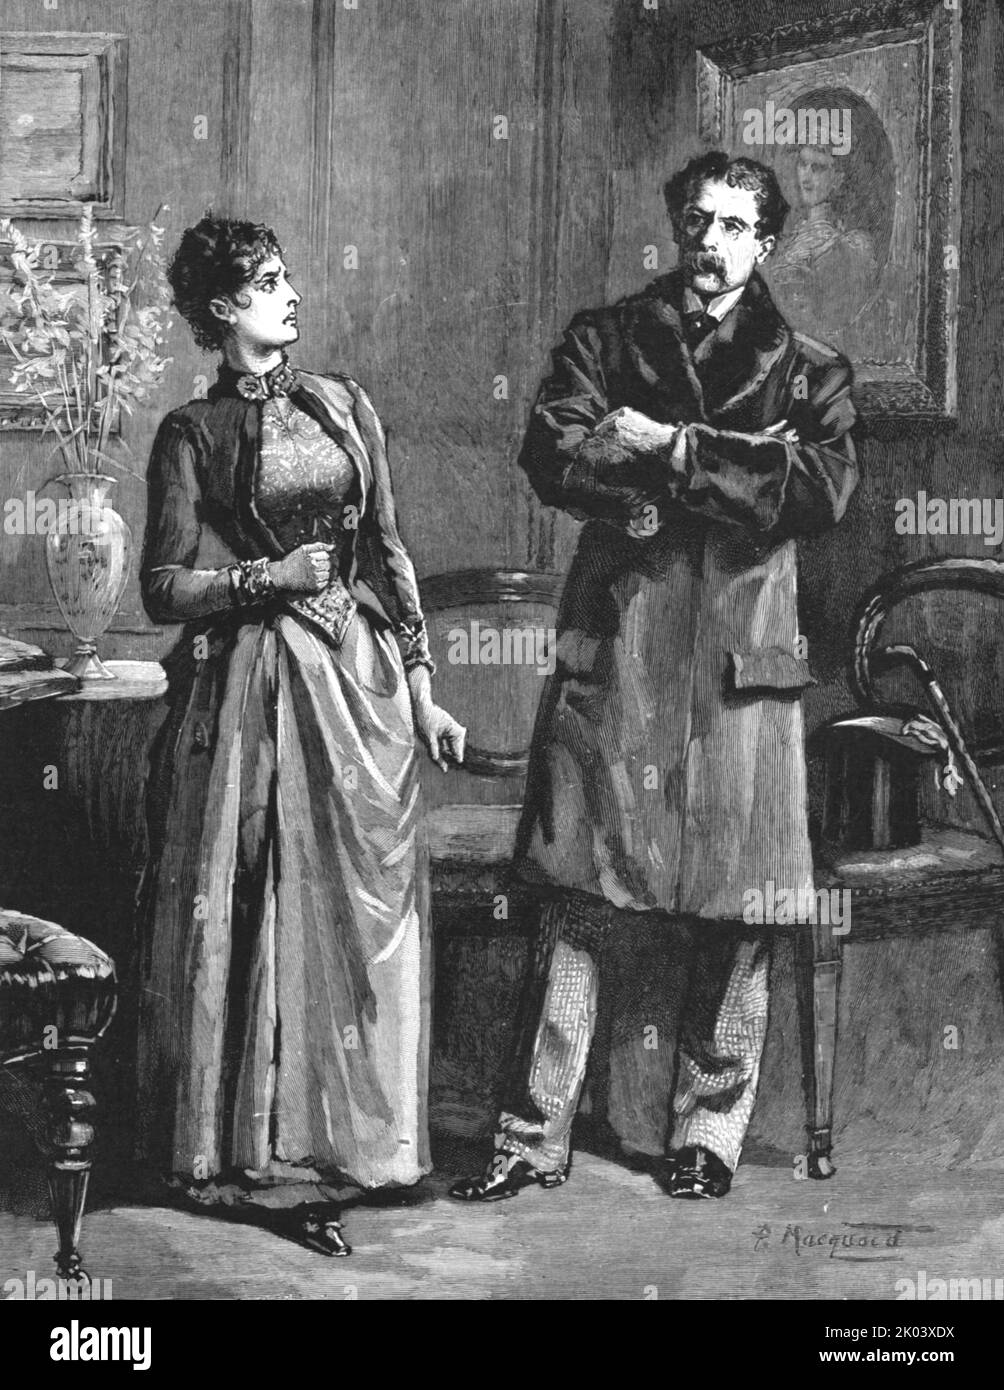 'Madame Leroux'; By Francis Eleanor Trollope; 'Oh, make yourself easy, Mr. Rushmere,' she said, flashing a bright angry glance upon him', 1890. From &quot;The Graphic. An Illustrated Weekly Newspaper&quot;, Volume 41. January to June, 1890. Stock Photo